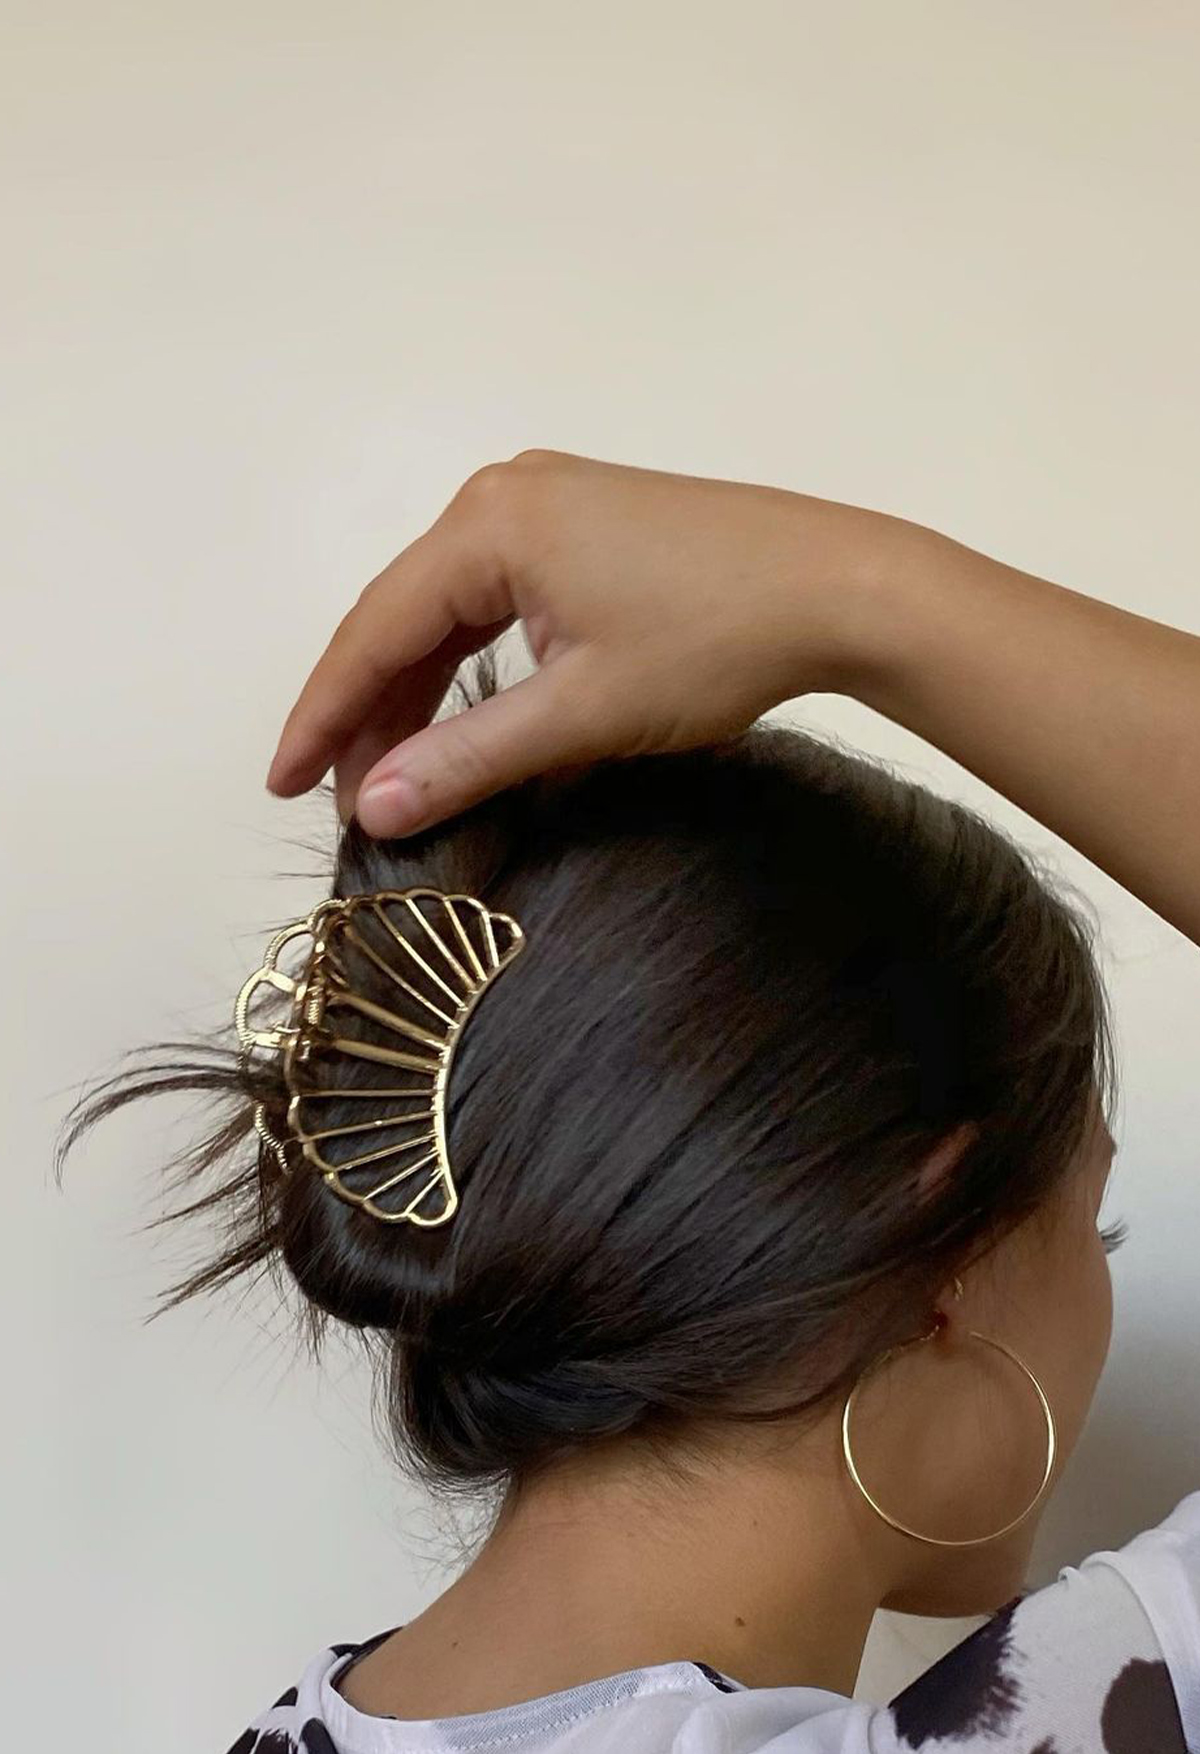 Celebs Are Rocking Hair Clips Making It A Major Trend! | Femina.in